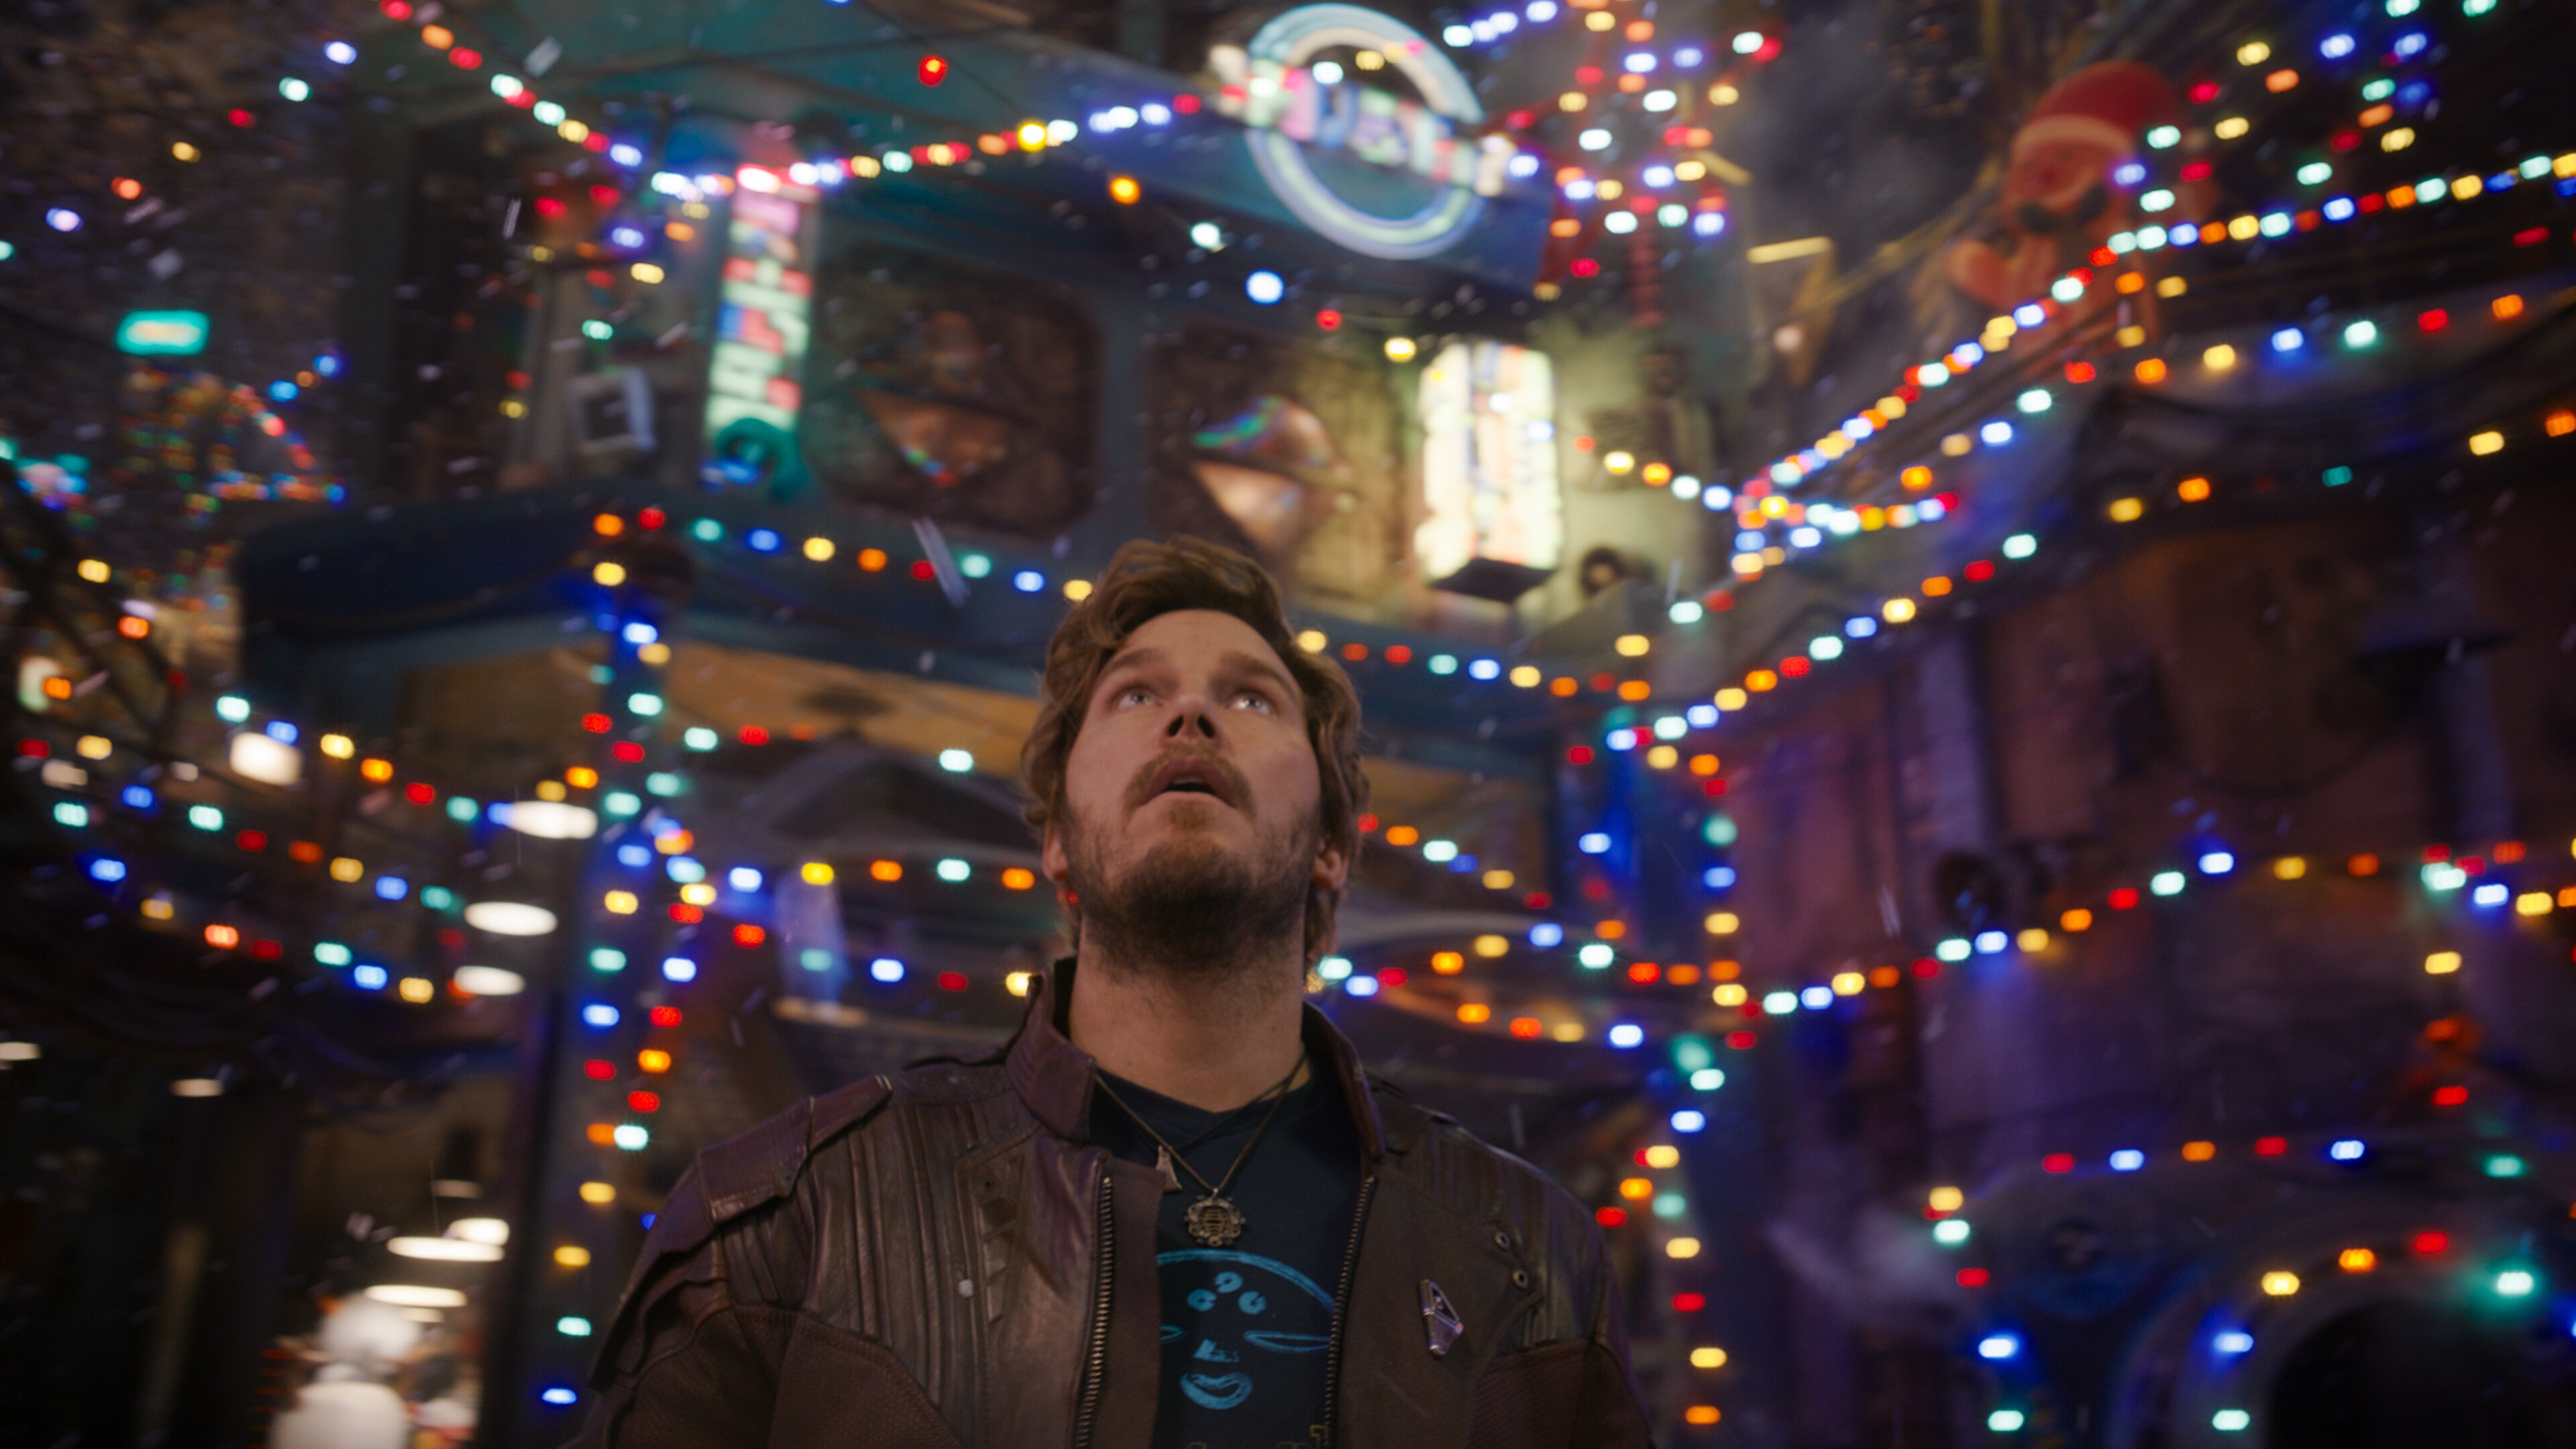 Chris Pratt as Peter Quill/Star-Lord in Marvel Studios' THE GUARDIANS OF THE GALAXY: HOLIDAY SPECIAL, exclusively on Disney+. Photo courtesy of Marvel Studios. © 2022 MARVEL.